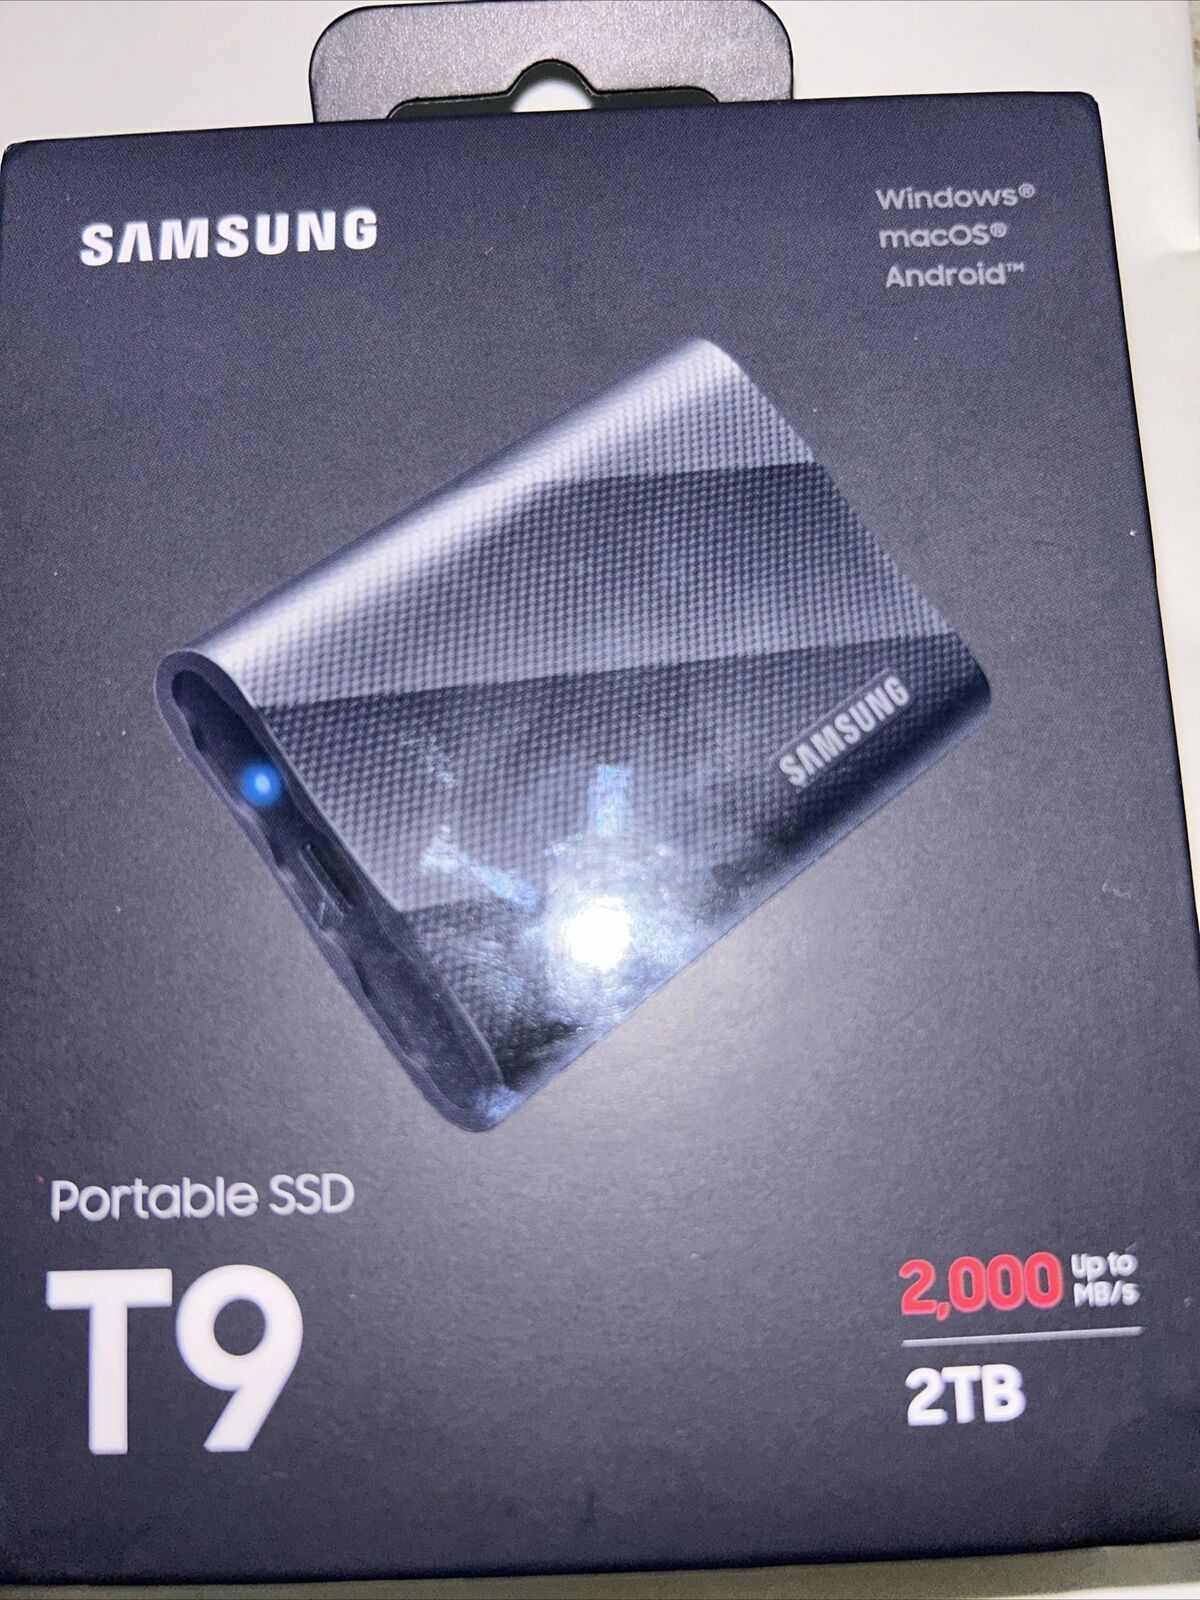 Samsung - T9 Portable SSD 2TB, Up to 2,000MB/s, USB 3.2 Gen2 - Black New Sealed